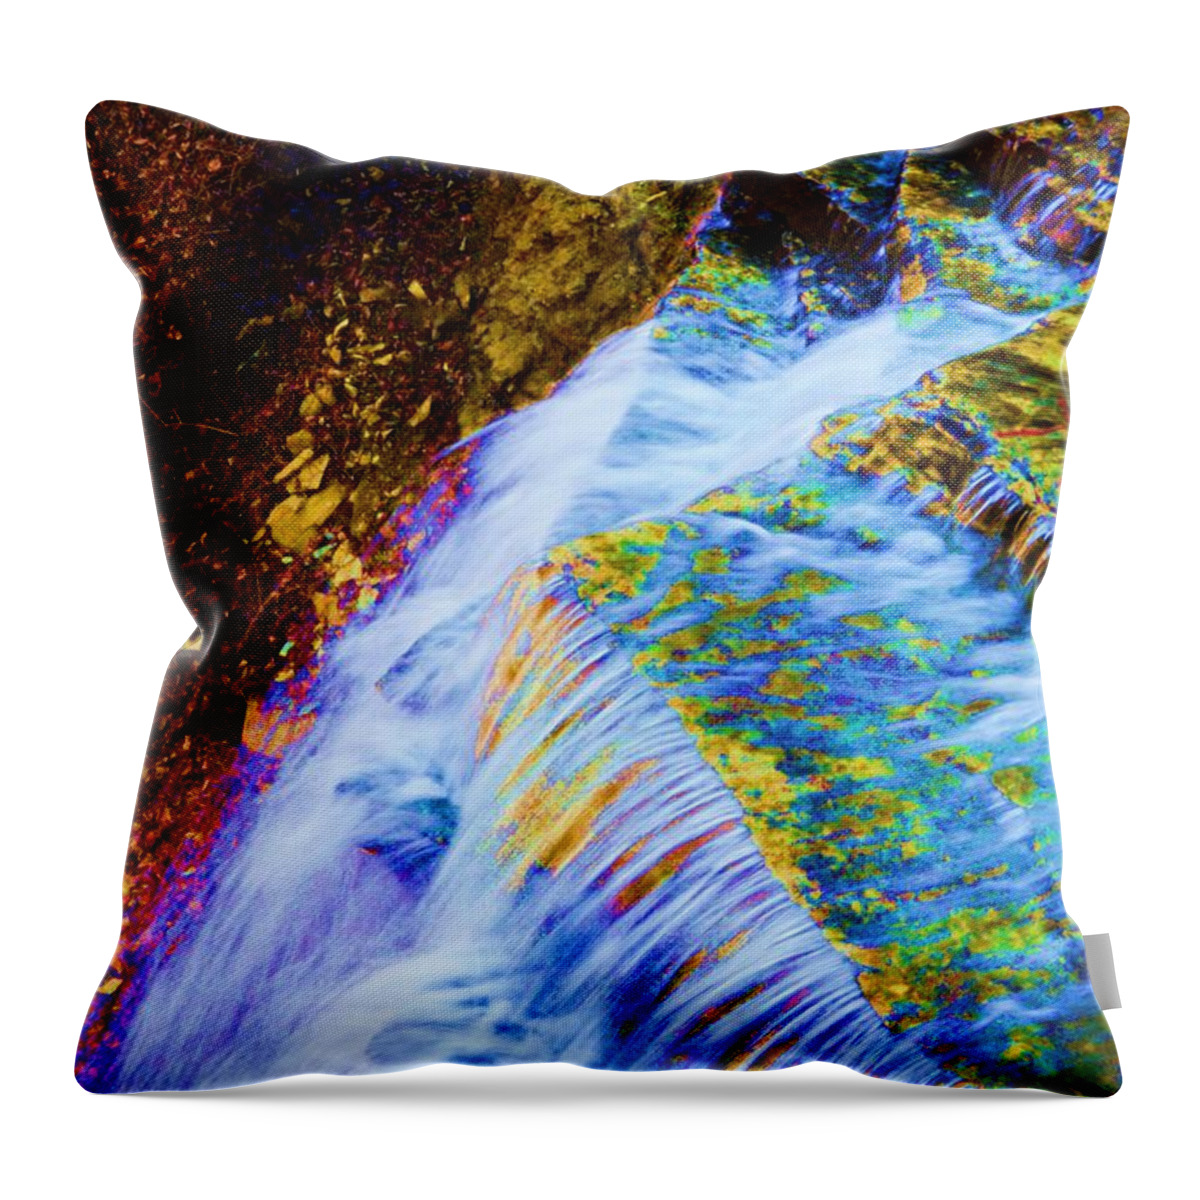 Waterfalls Throw Pillow featuring the photograph Water Art by Stacie Siemsen